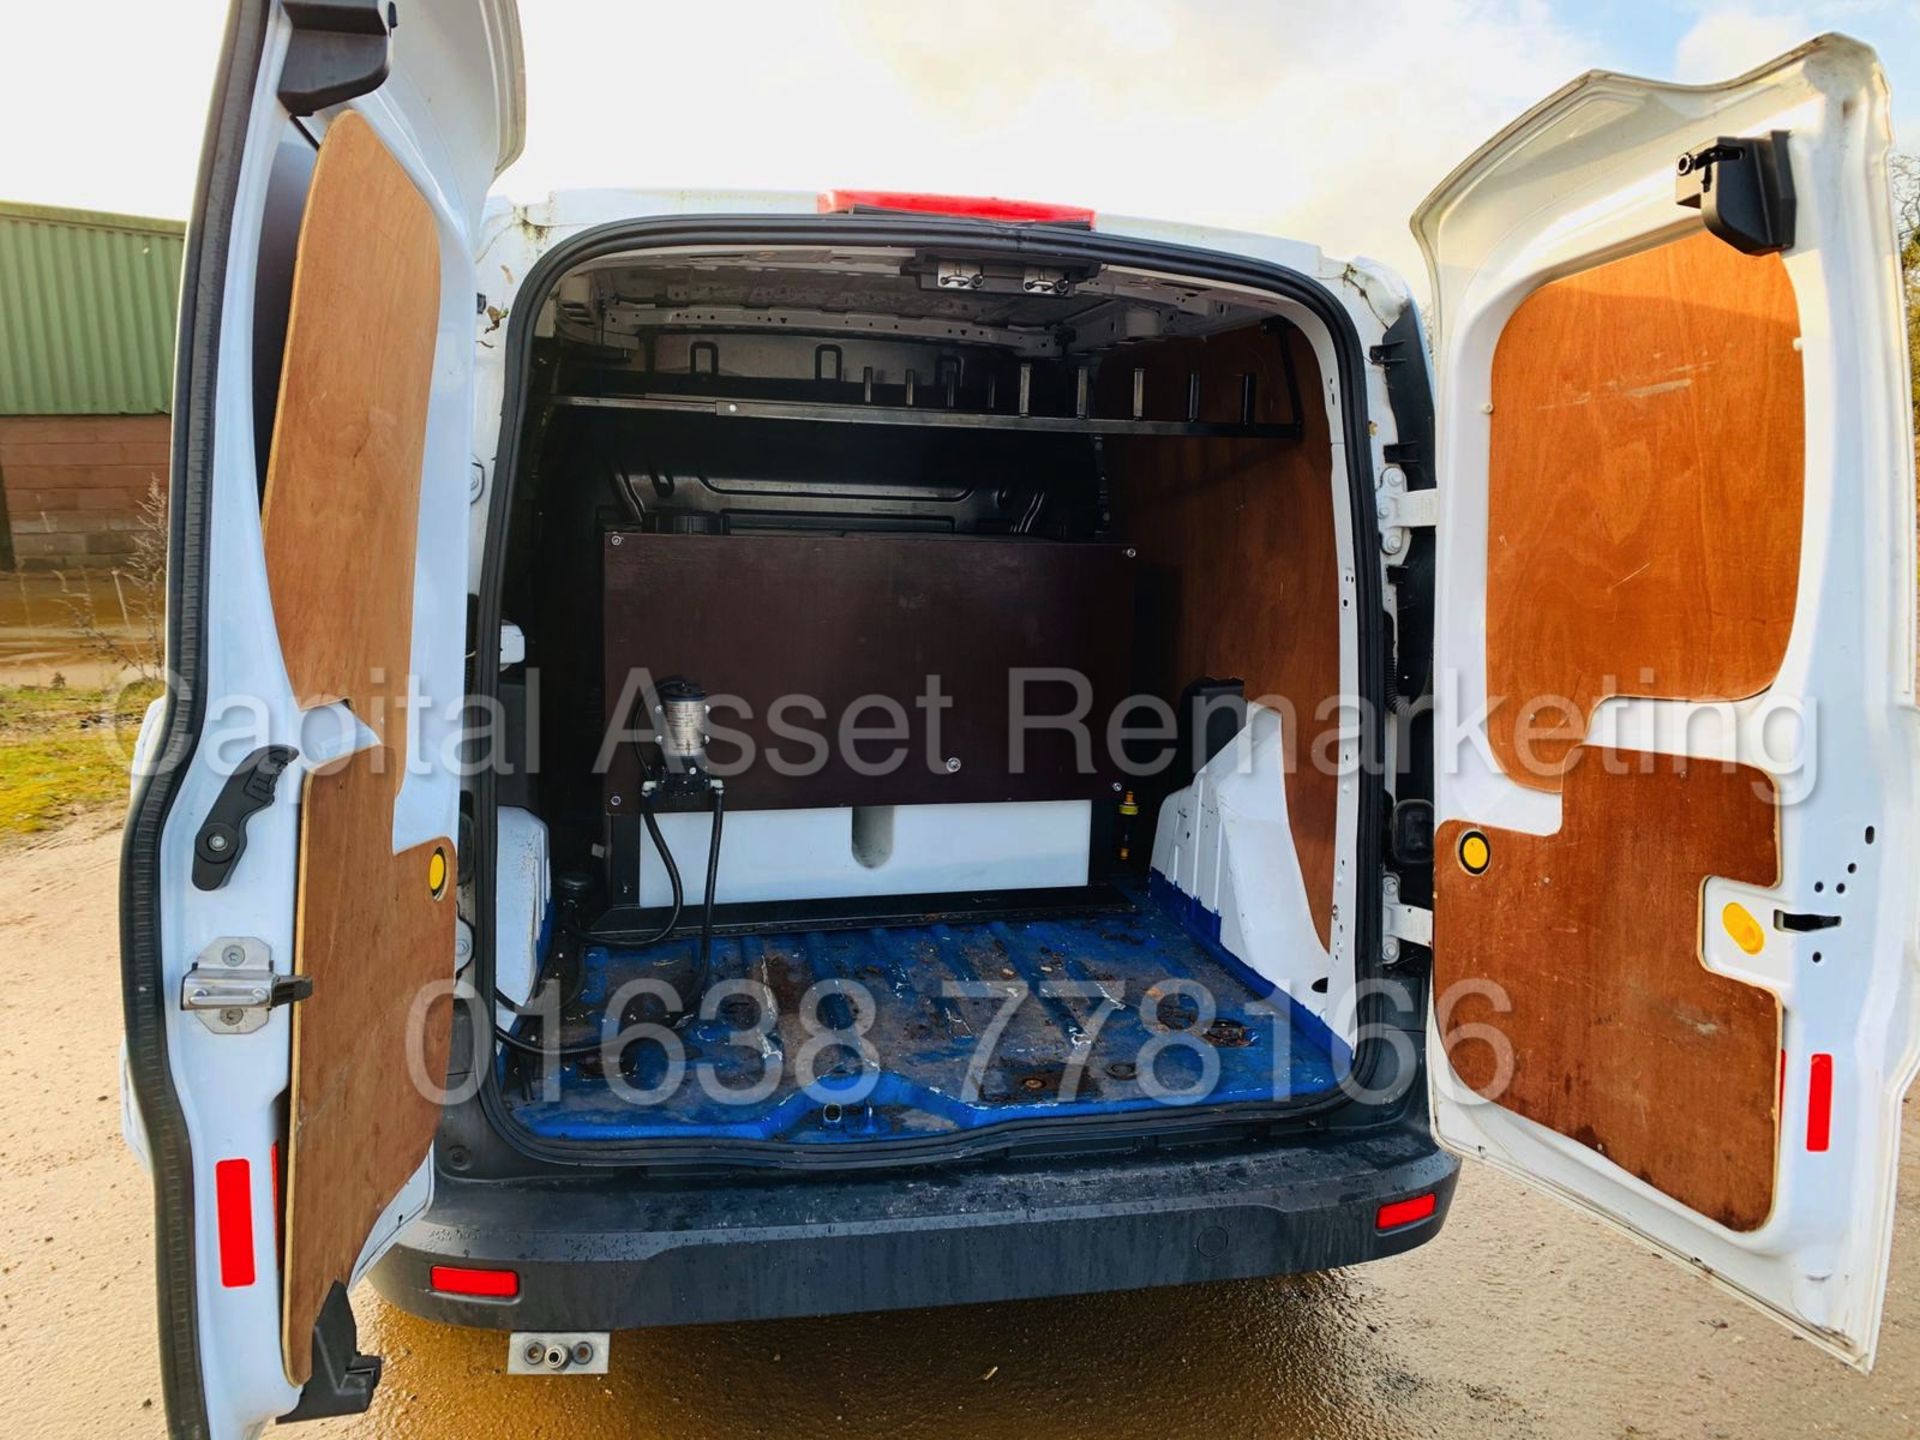 (On Sale) FORD TRANSIT CONNECT *SWB - JETTING UNIT / PANEL VAN* (2015) '1.5 TDCI - 5 SPEED' (NO VAT) - Image 7 of 20